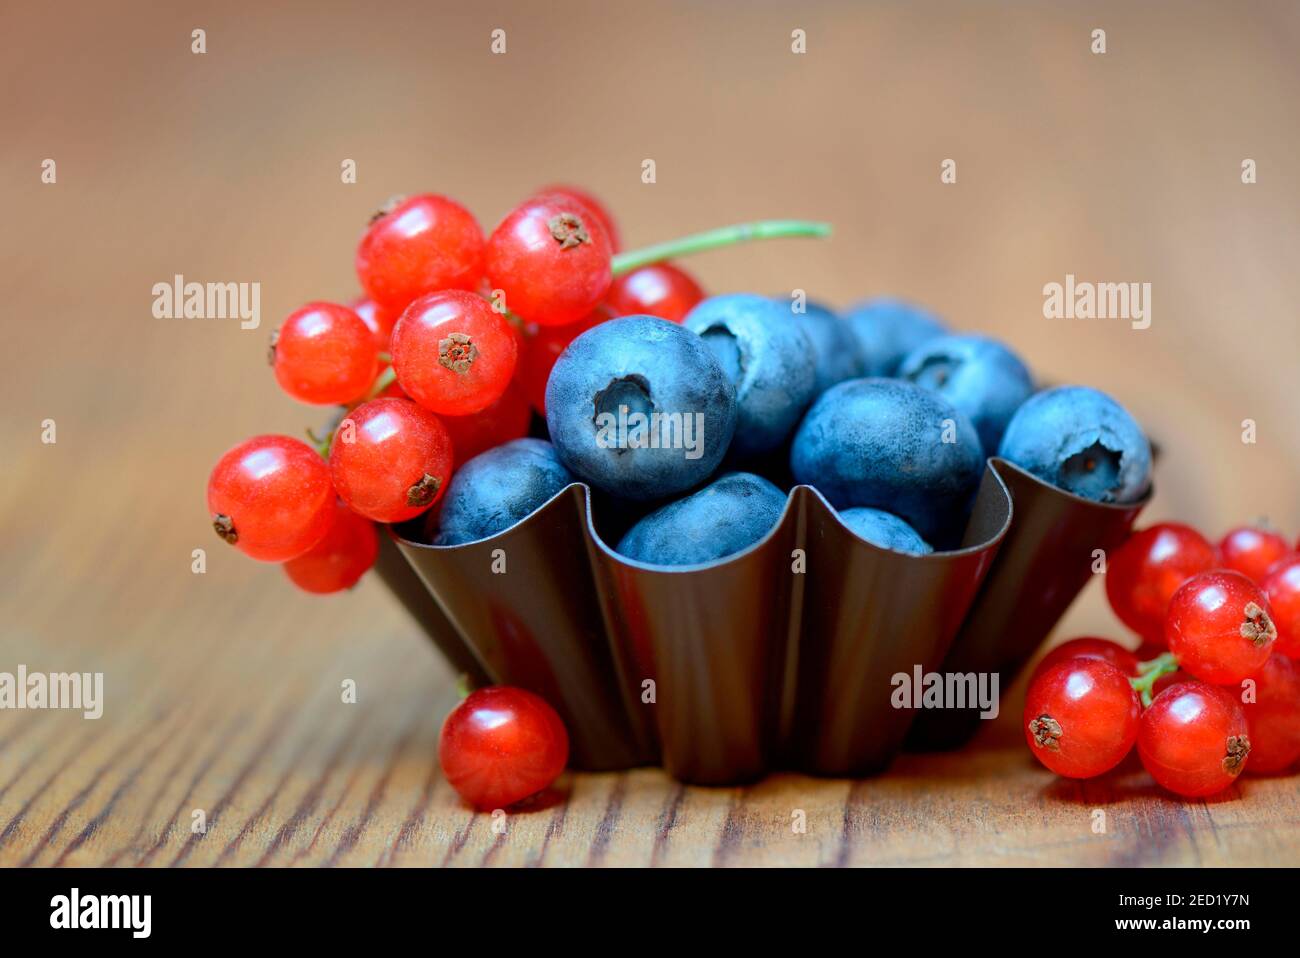 Currants and blueberries in baking tin, cultivated blueberry Stock Photo